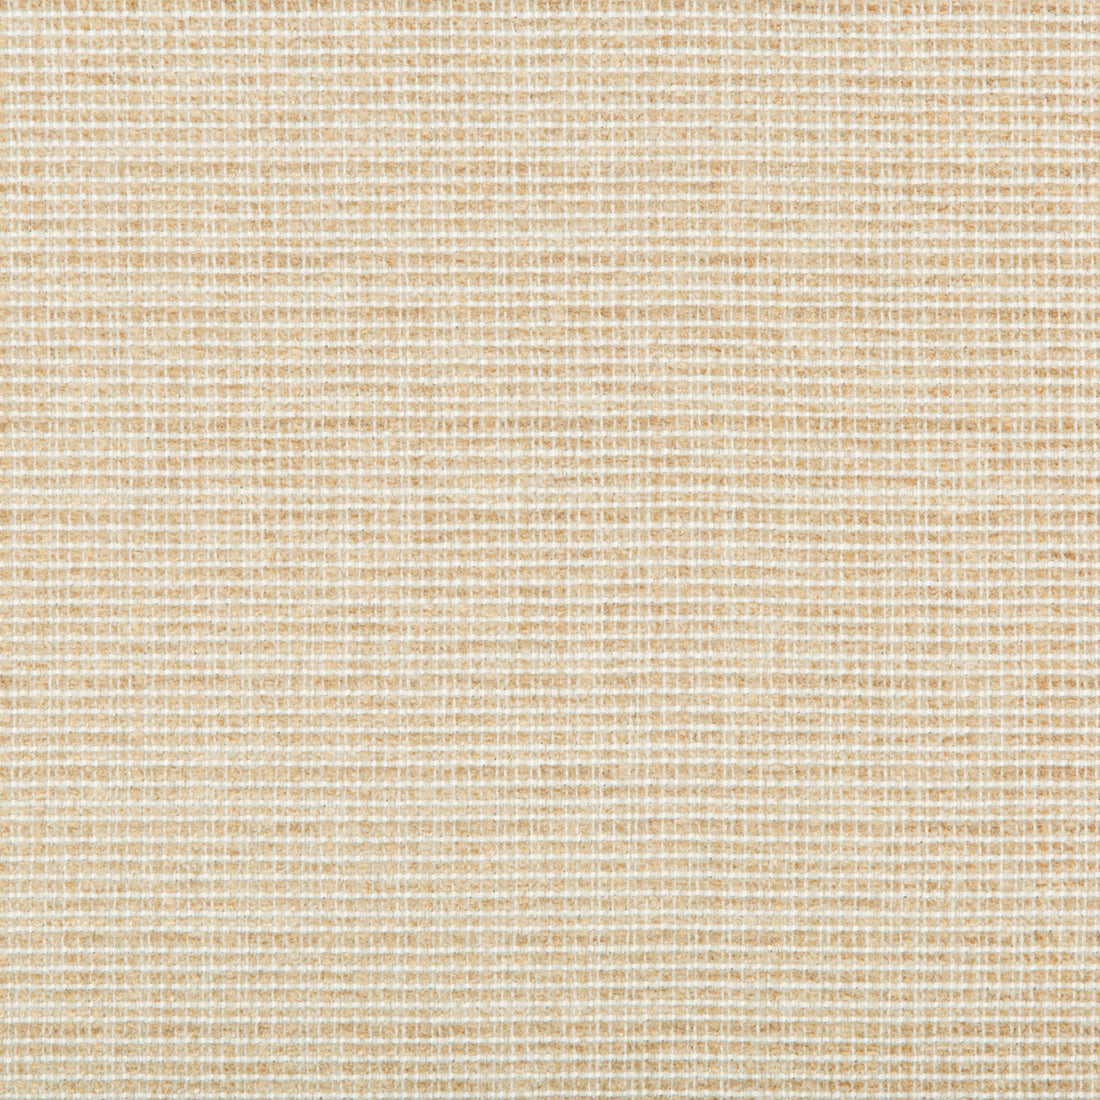 Saddlebrook fabric in sand color - pattern 35345.16.0 - by Kravet Basics in the Greenwich collection